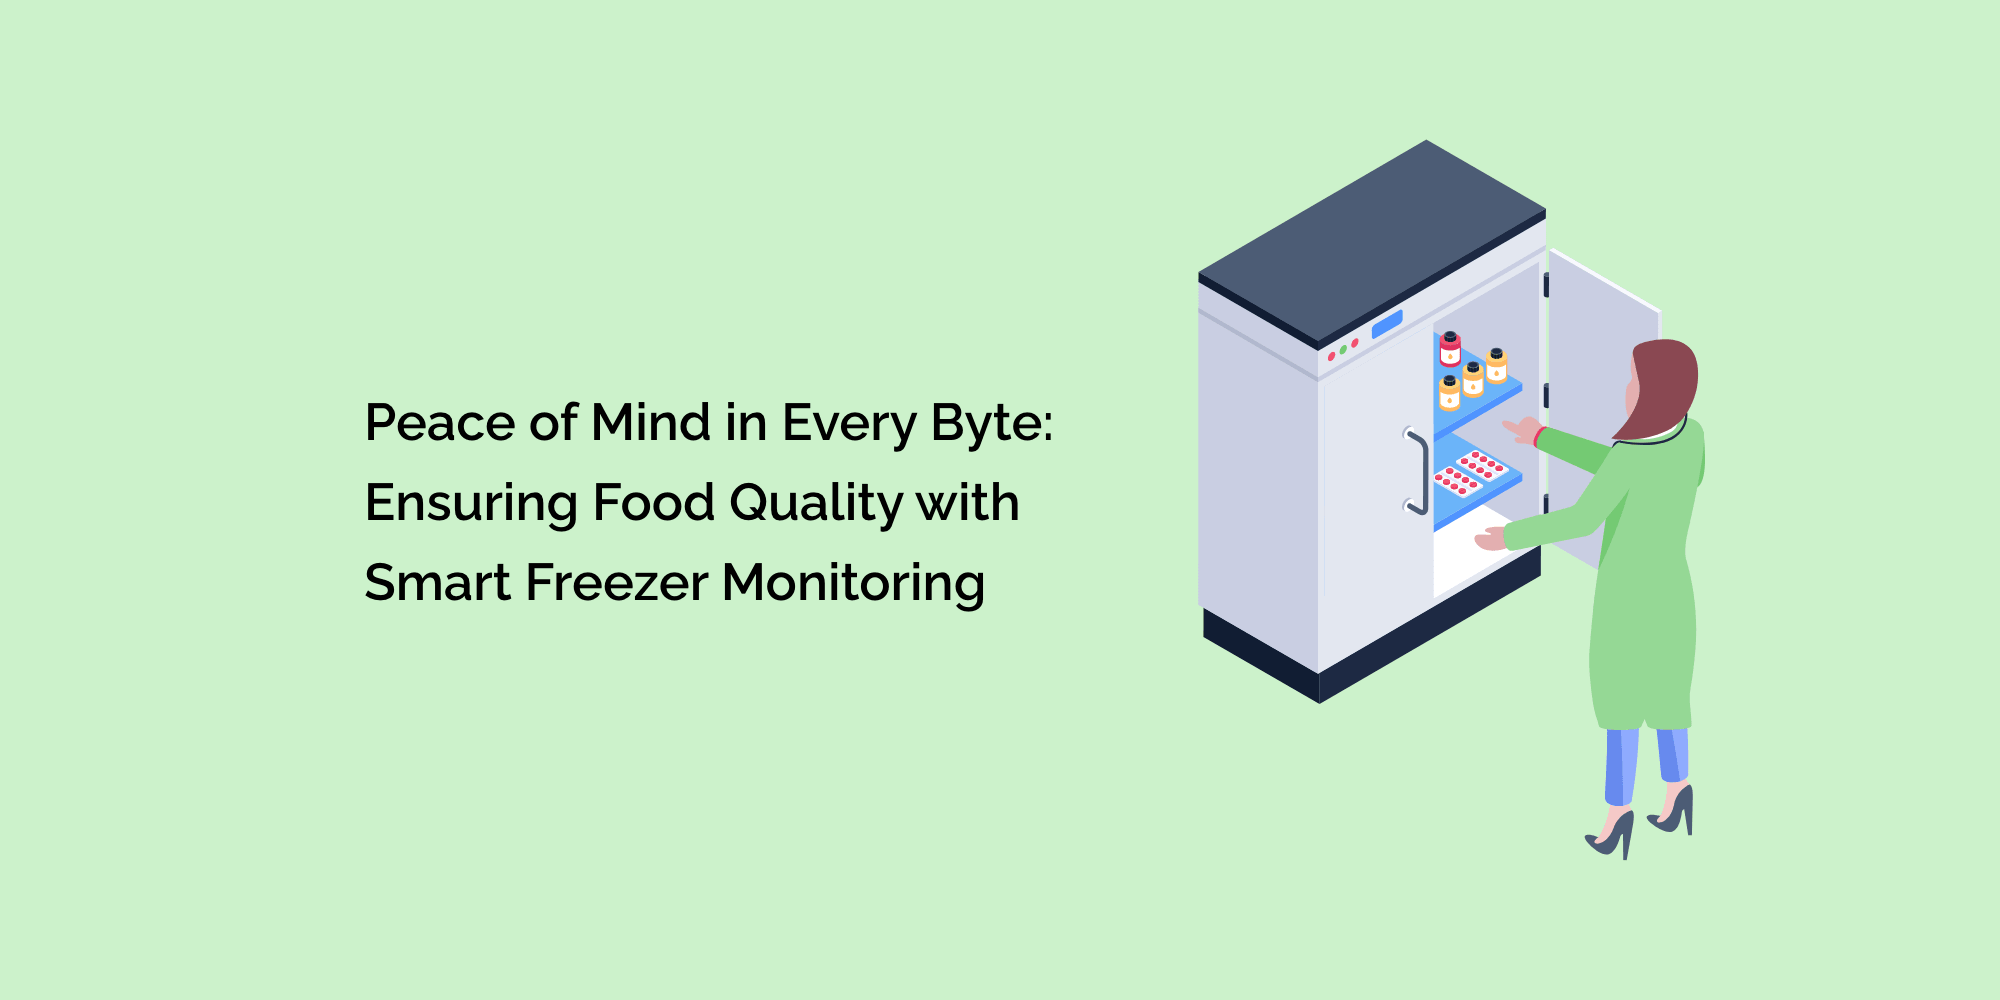 Peace of Mind in Every Byte: Ensuring Food Quality with Smart Freezer Monitoring